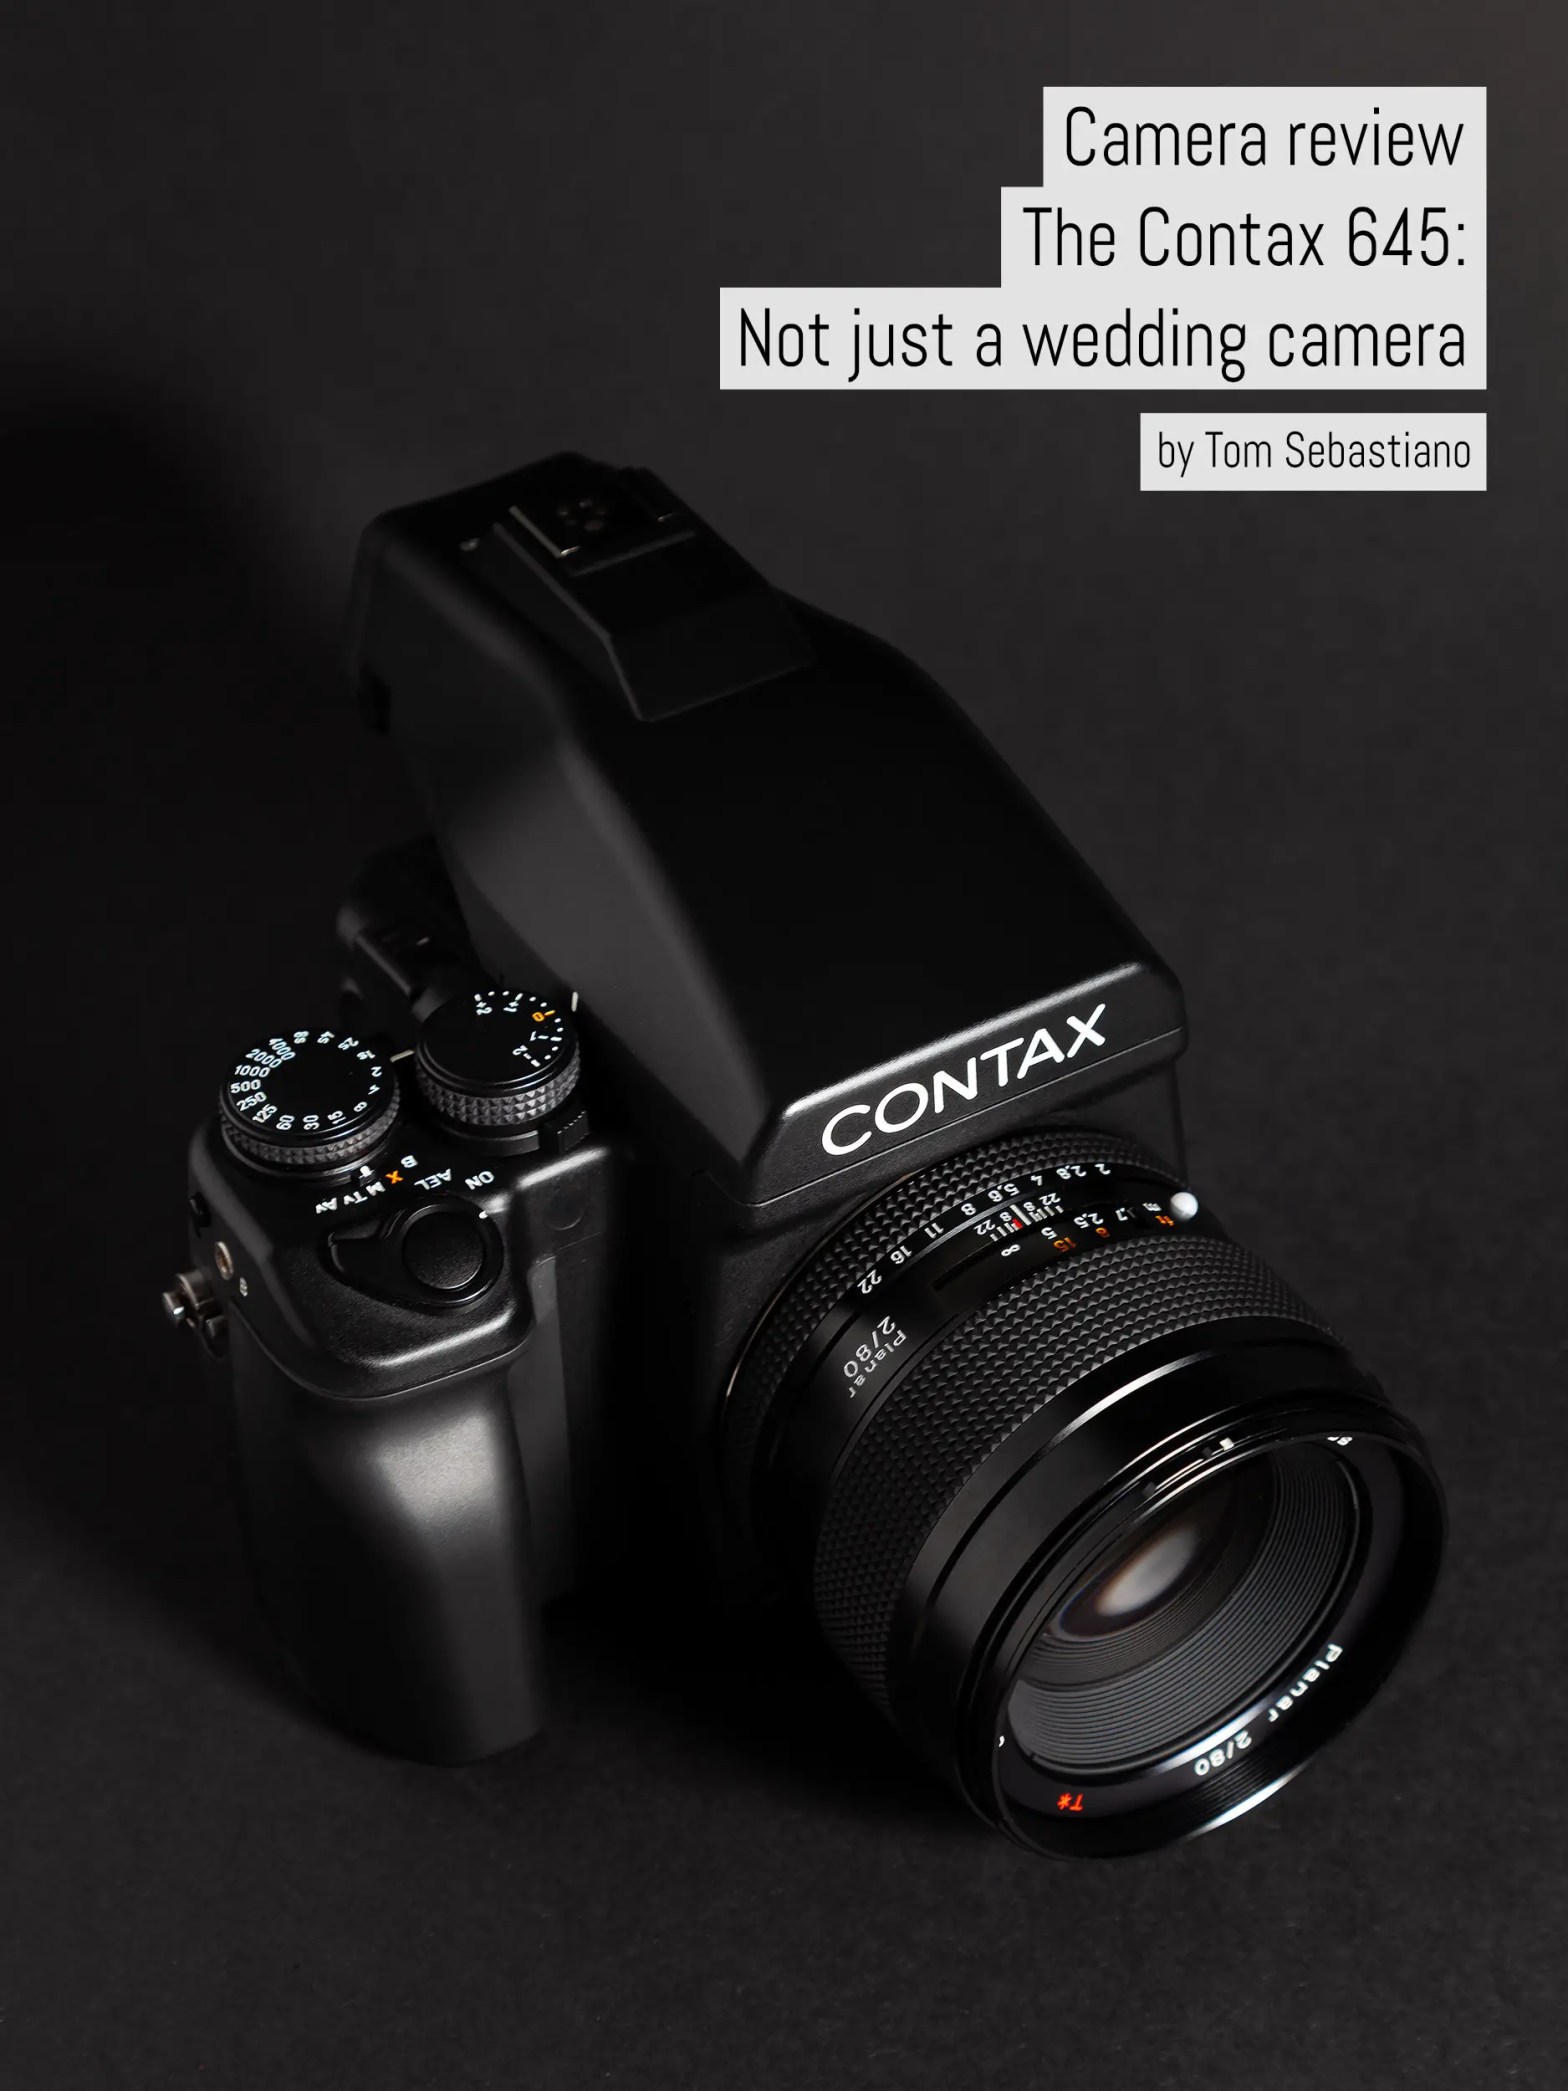 The Contax 645: Not just a wedding camera